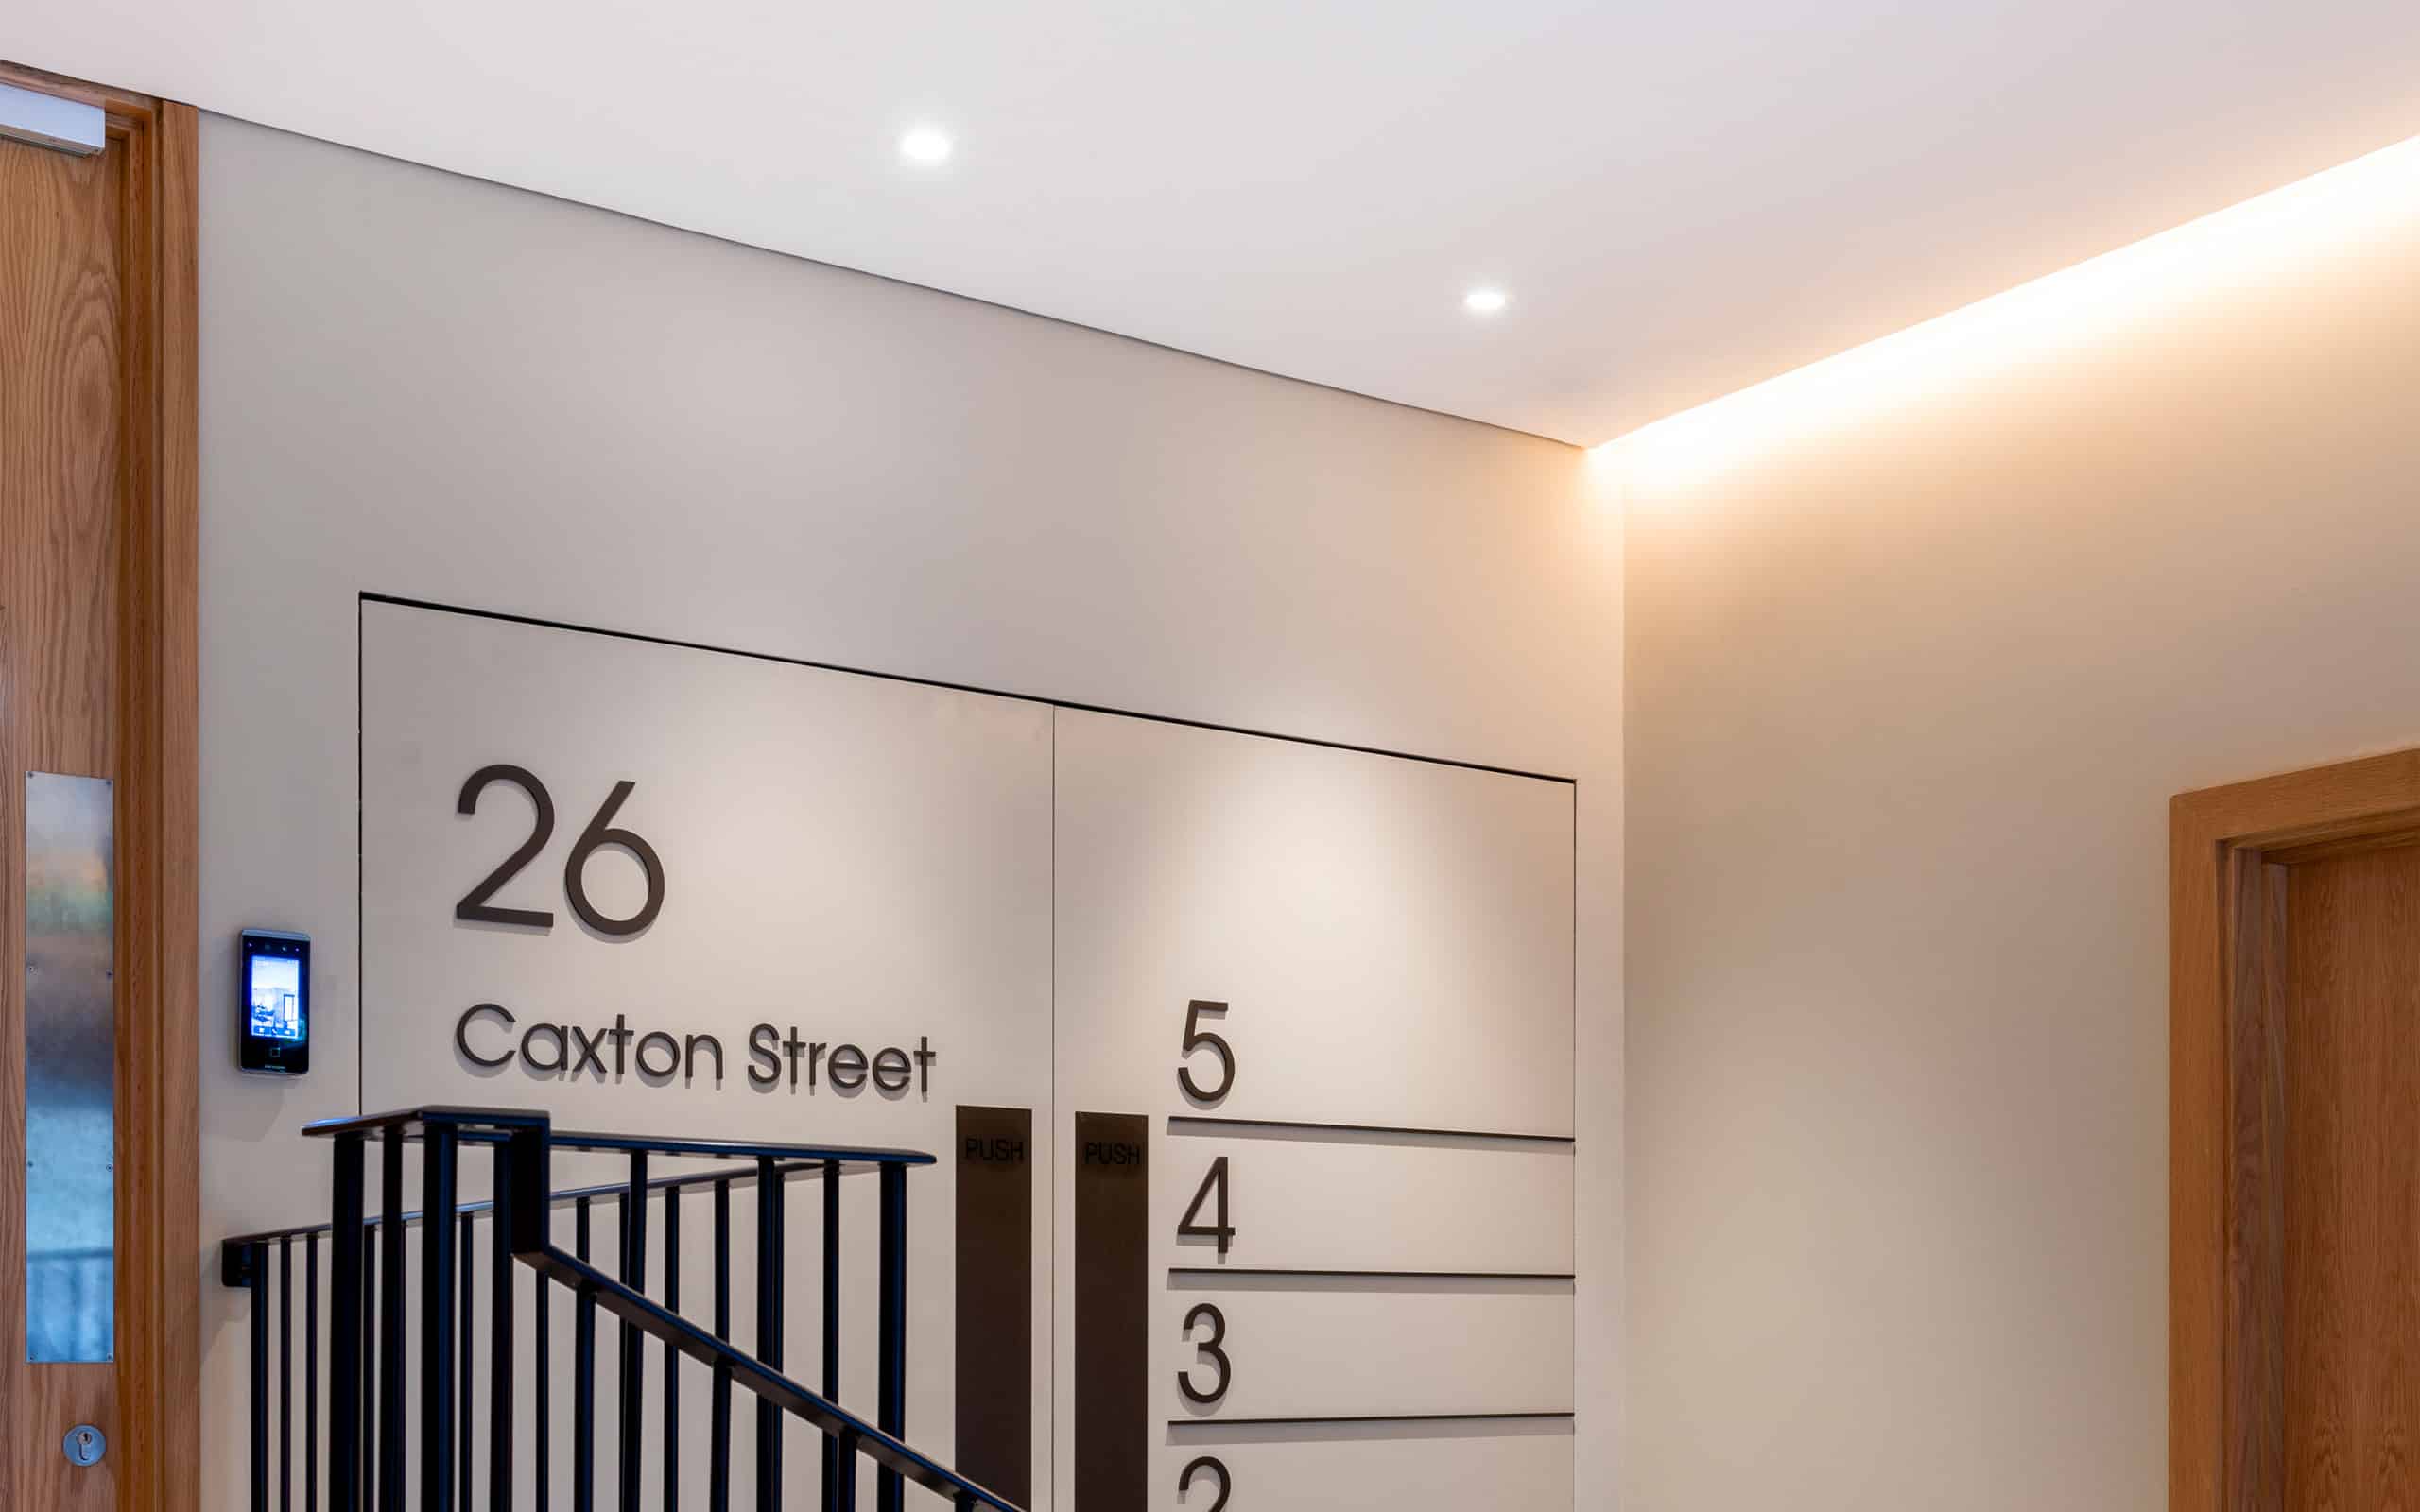 Casambi Wireless Lighting Control Featured in Stairwell of Luxury Office Building